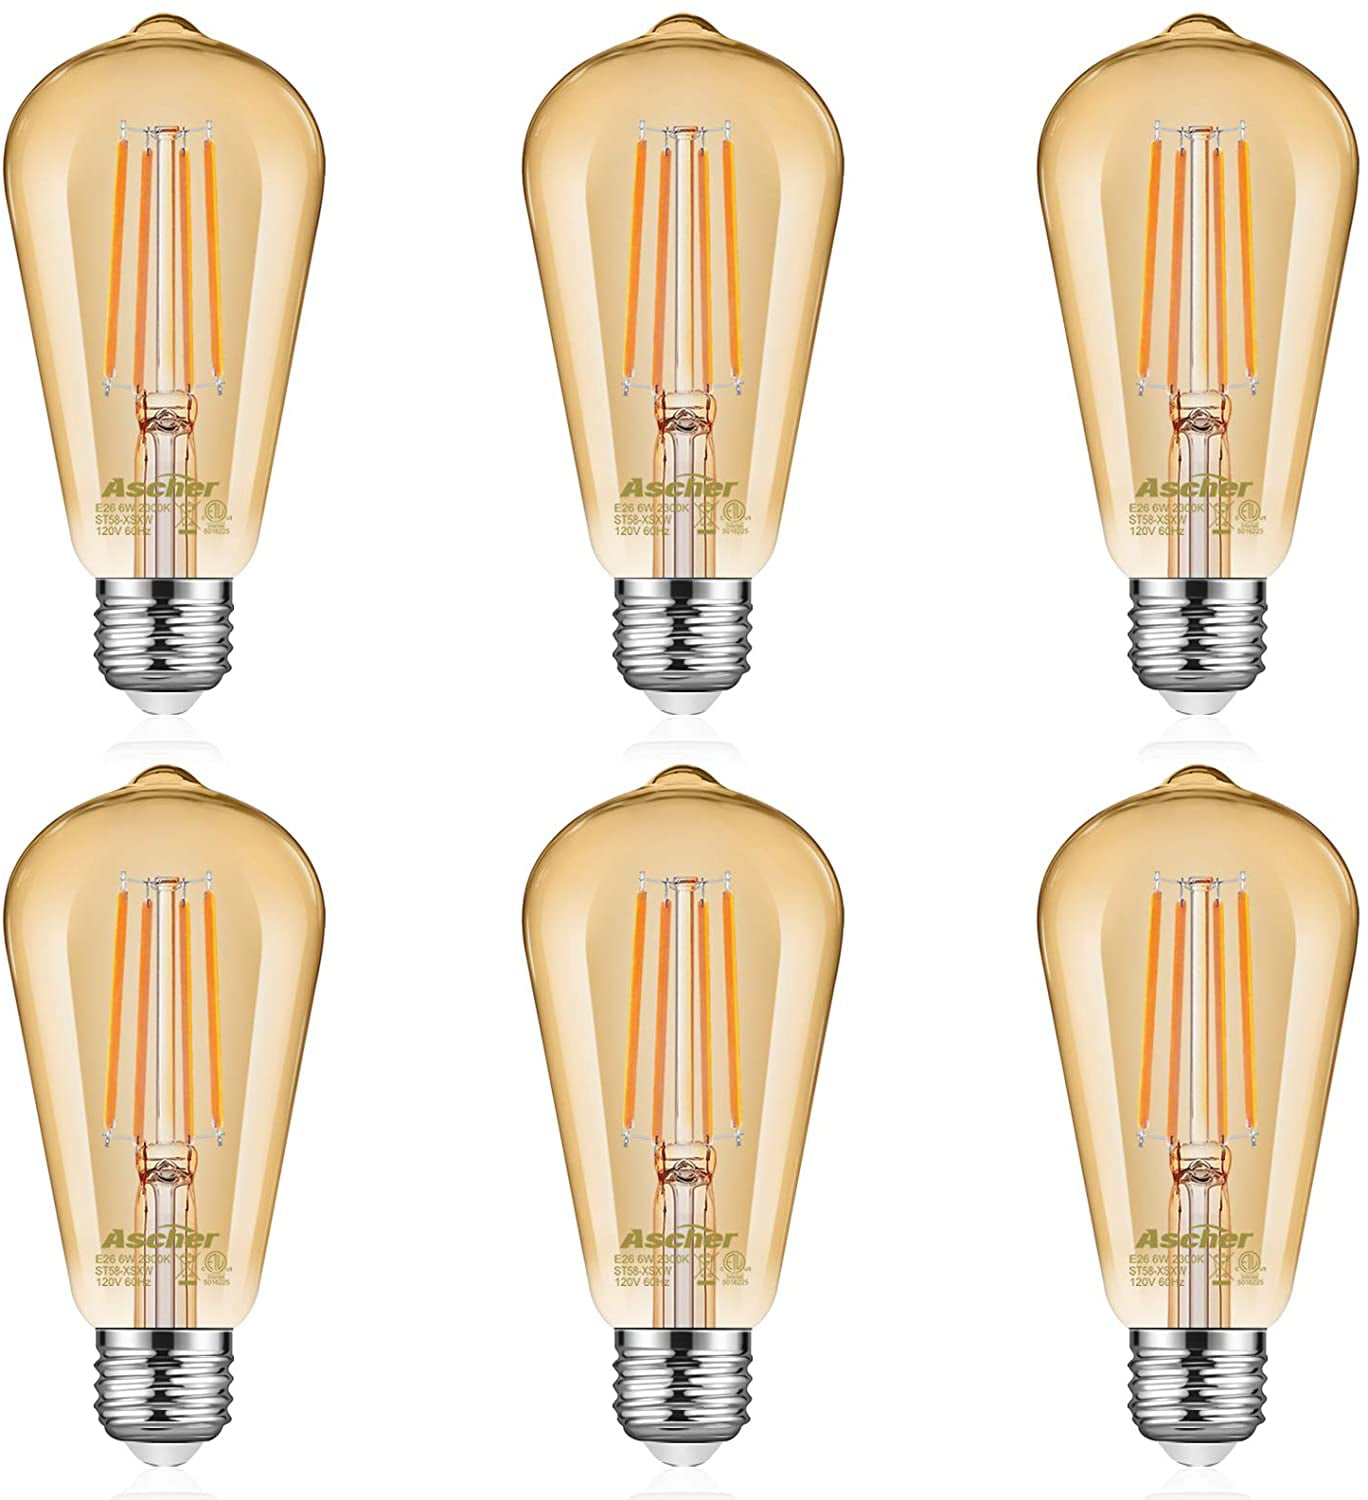 Ascher Vintage LED Edison Bulbs 6W 700 Lumens Equivalent 60W E26 Base Amber Warm 2300K Non-Dimmable 4 Packs Antique Style ST58 LED Filament Bulbs 